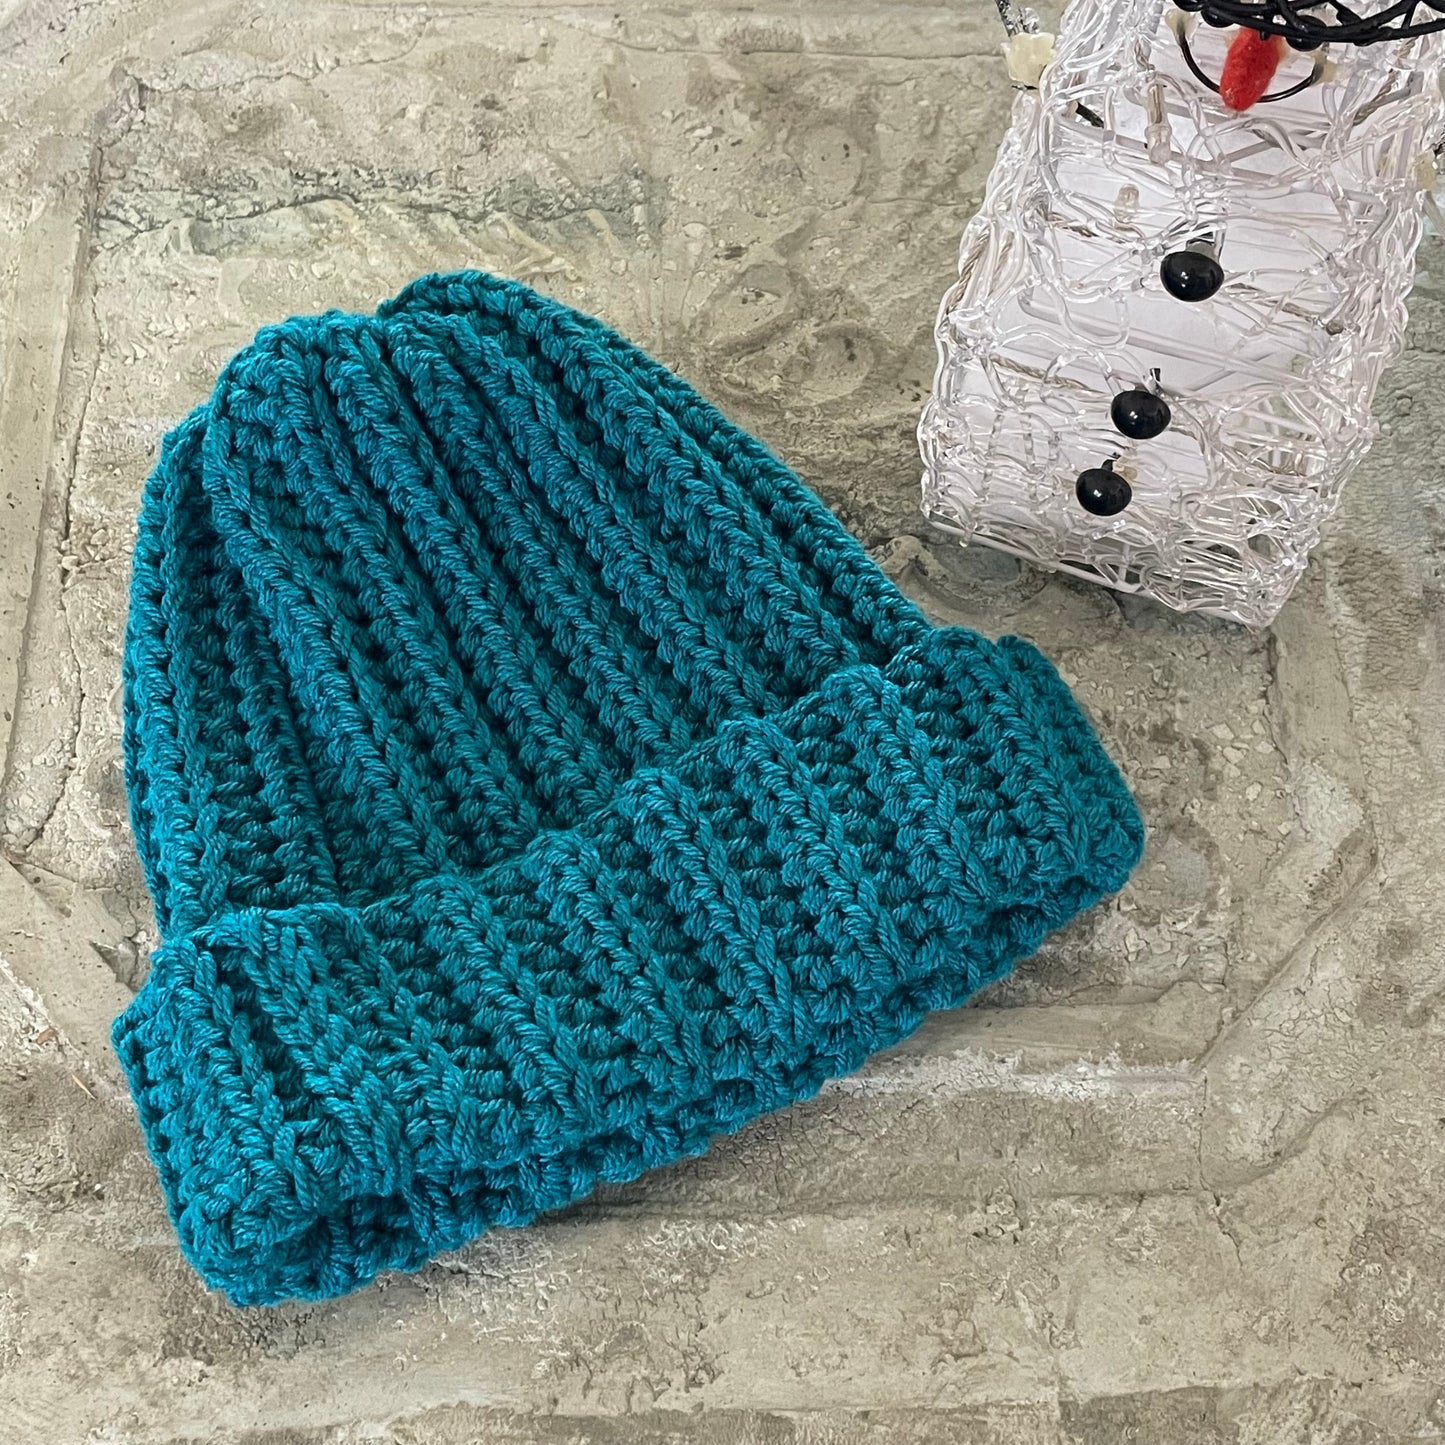 Extra Warm Ribbed Cable Knit Hat Solid Blue Green Hand Crocheted Beanie Winter Unisex Outdoor Stretch Adjustable Cuff displayed flat on stone background